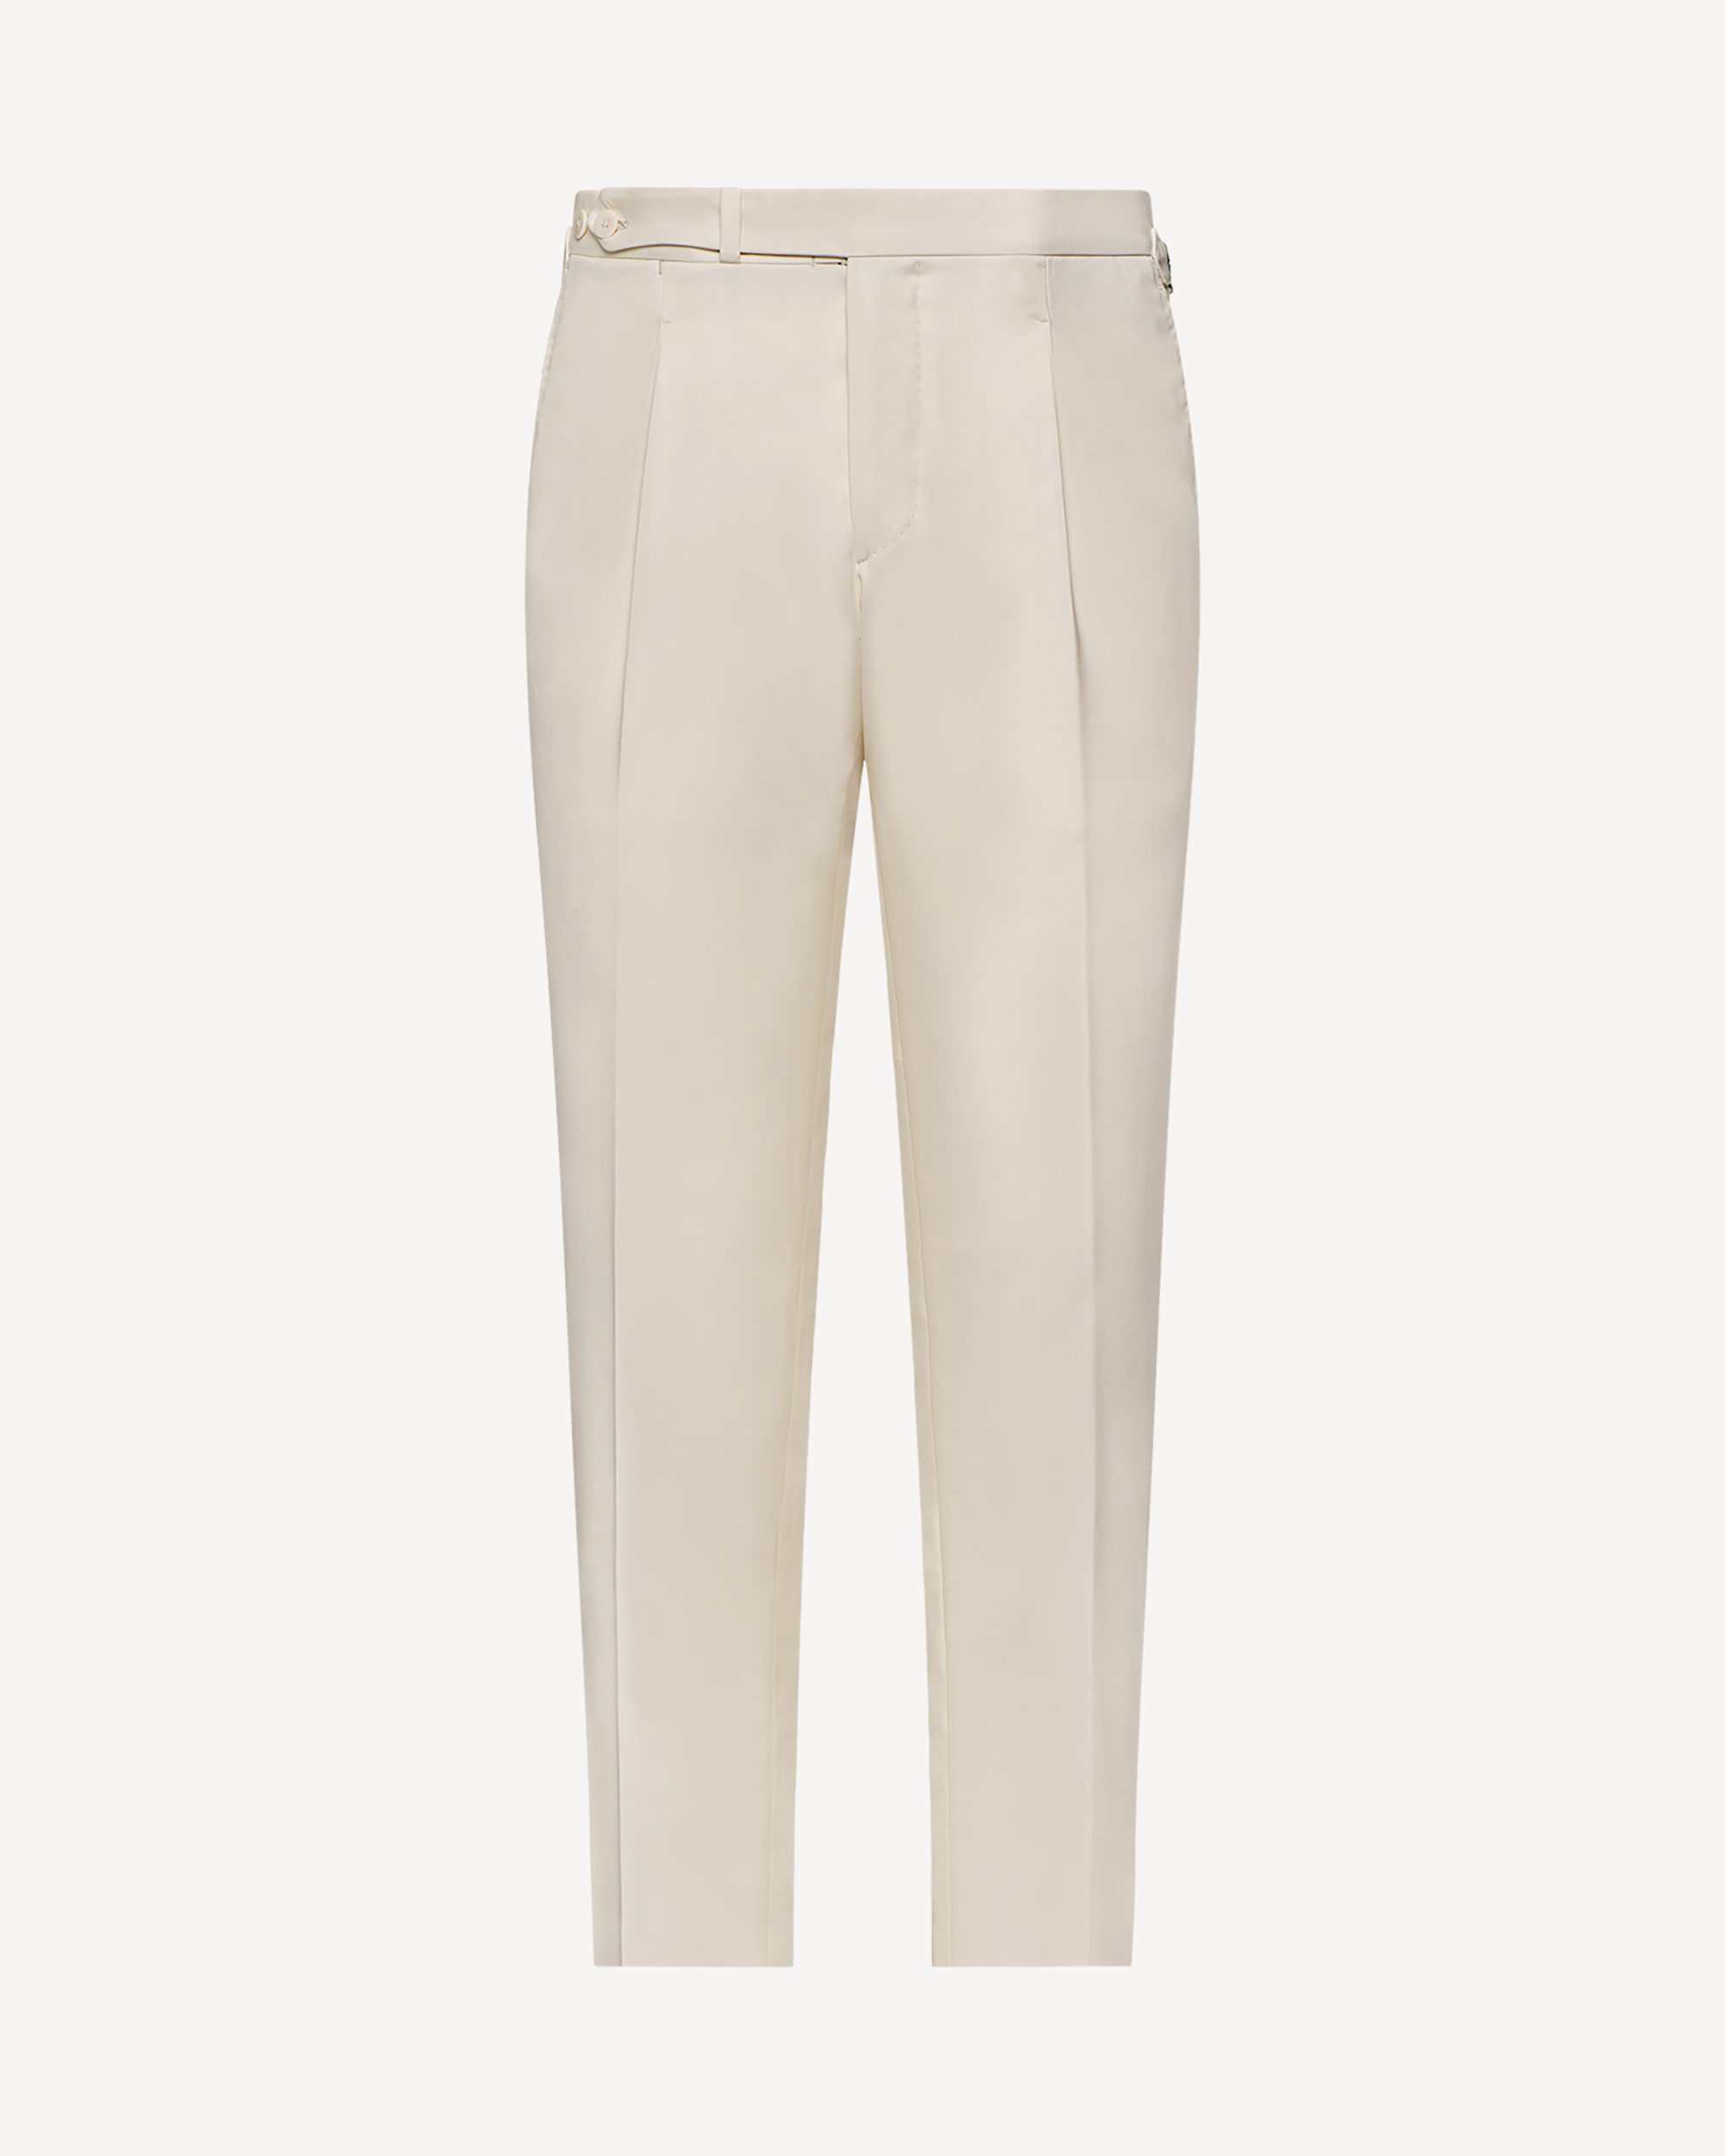 Single Pleated Sartorial Cotton Pants With Side Adjusters - Ivory